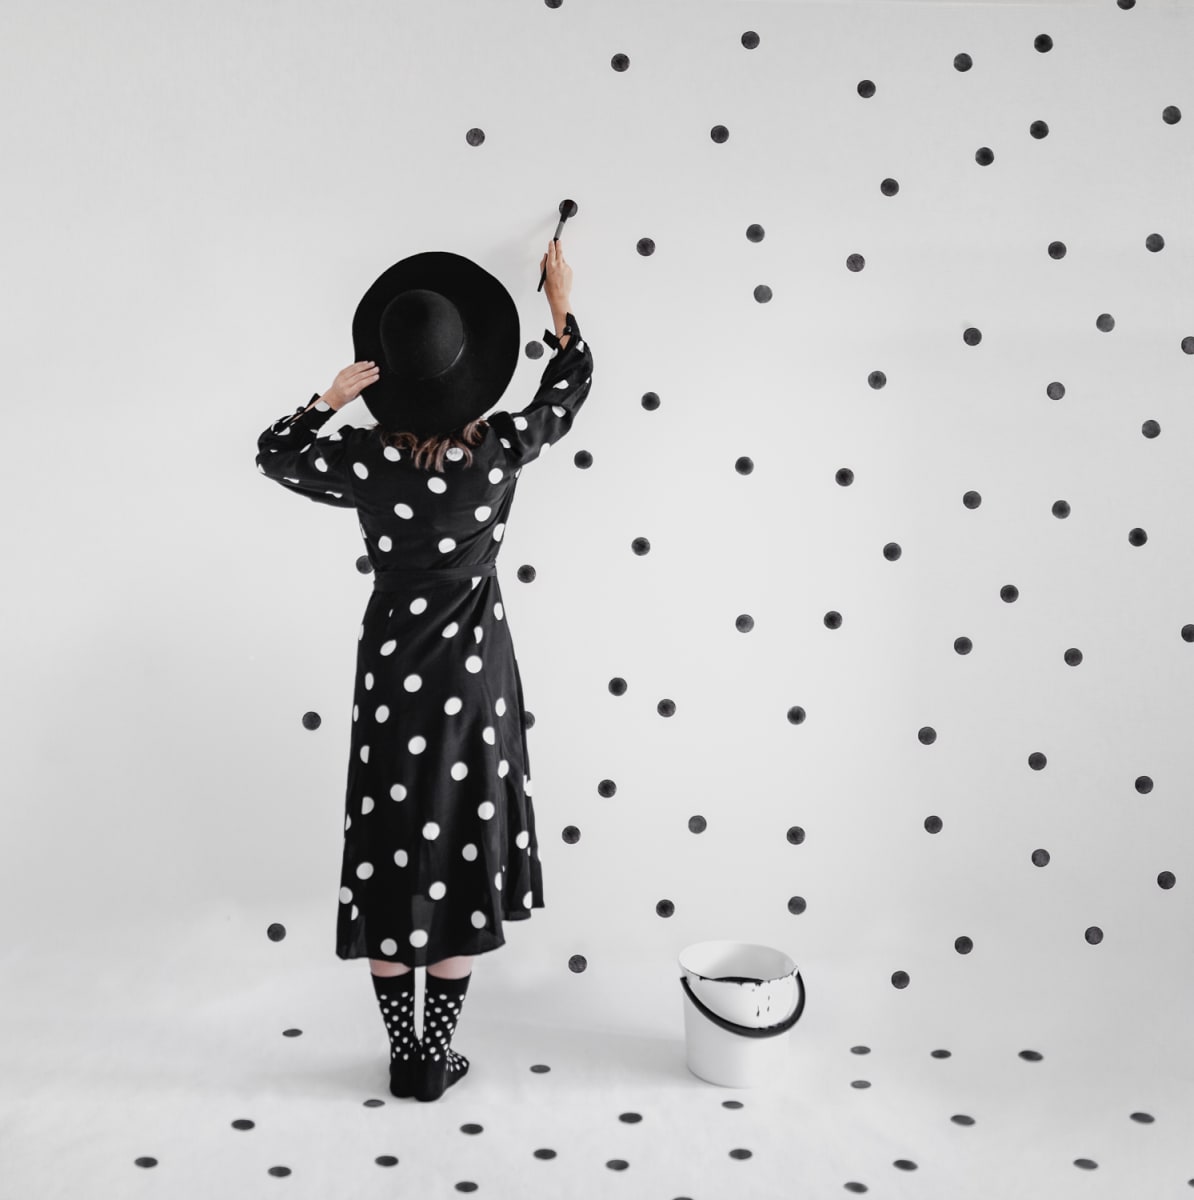 Polka Dot by Dasha Pears  Image: Infinity represents something that is boundless or endless, or else something that is larger than any real or natural number. What if you multiply infinity by its reflection, add the white to the black? It gets even more entertaining then.

This artwork was created in a collaboration with another photographer and self-portrait artist, known as Kutovakika.